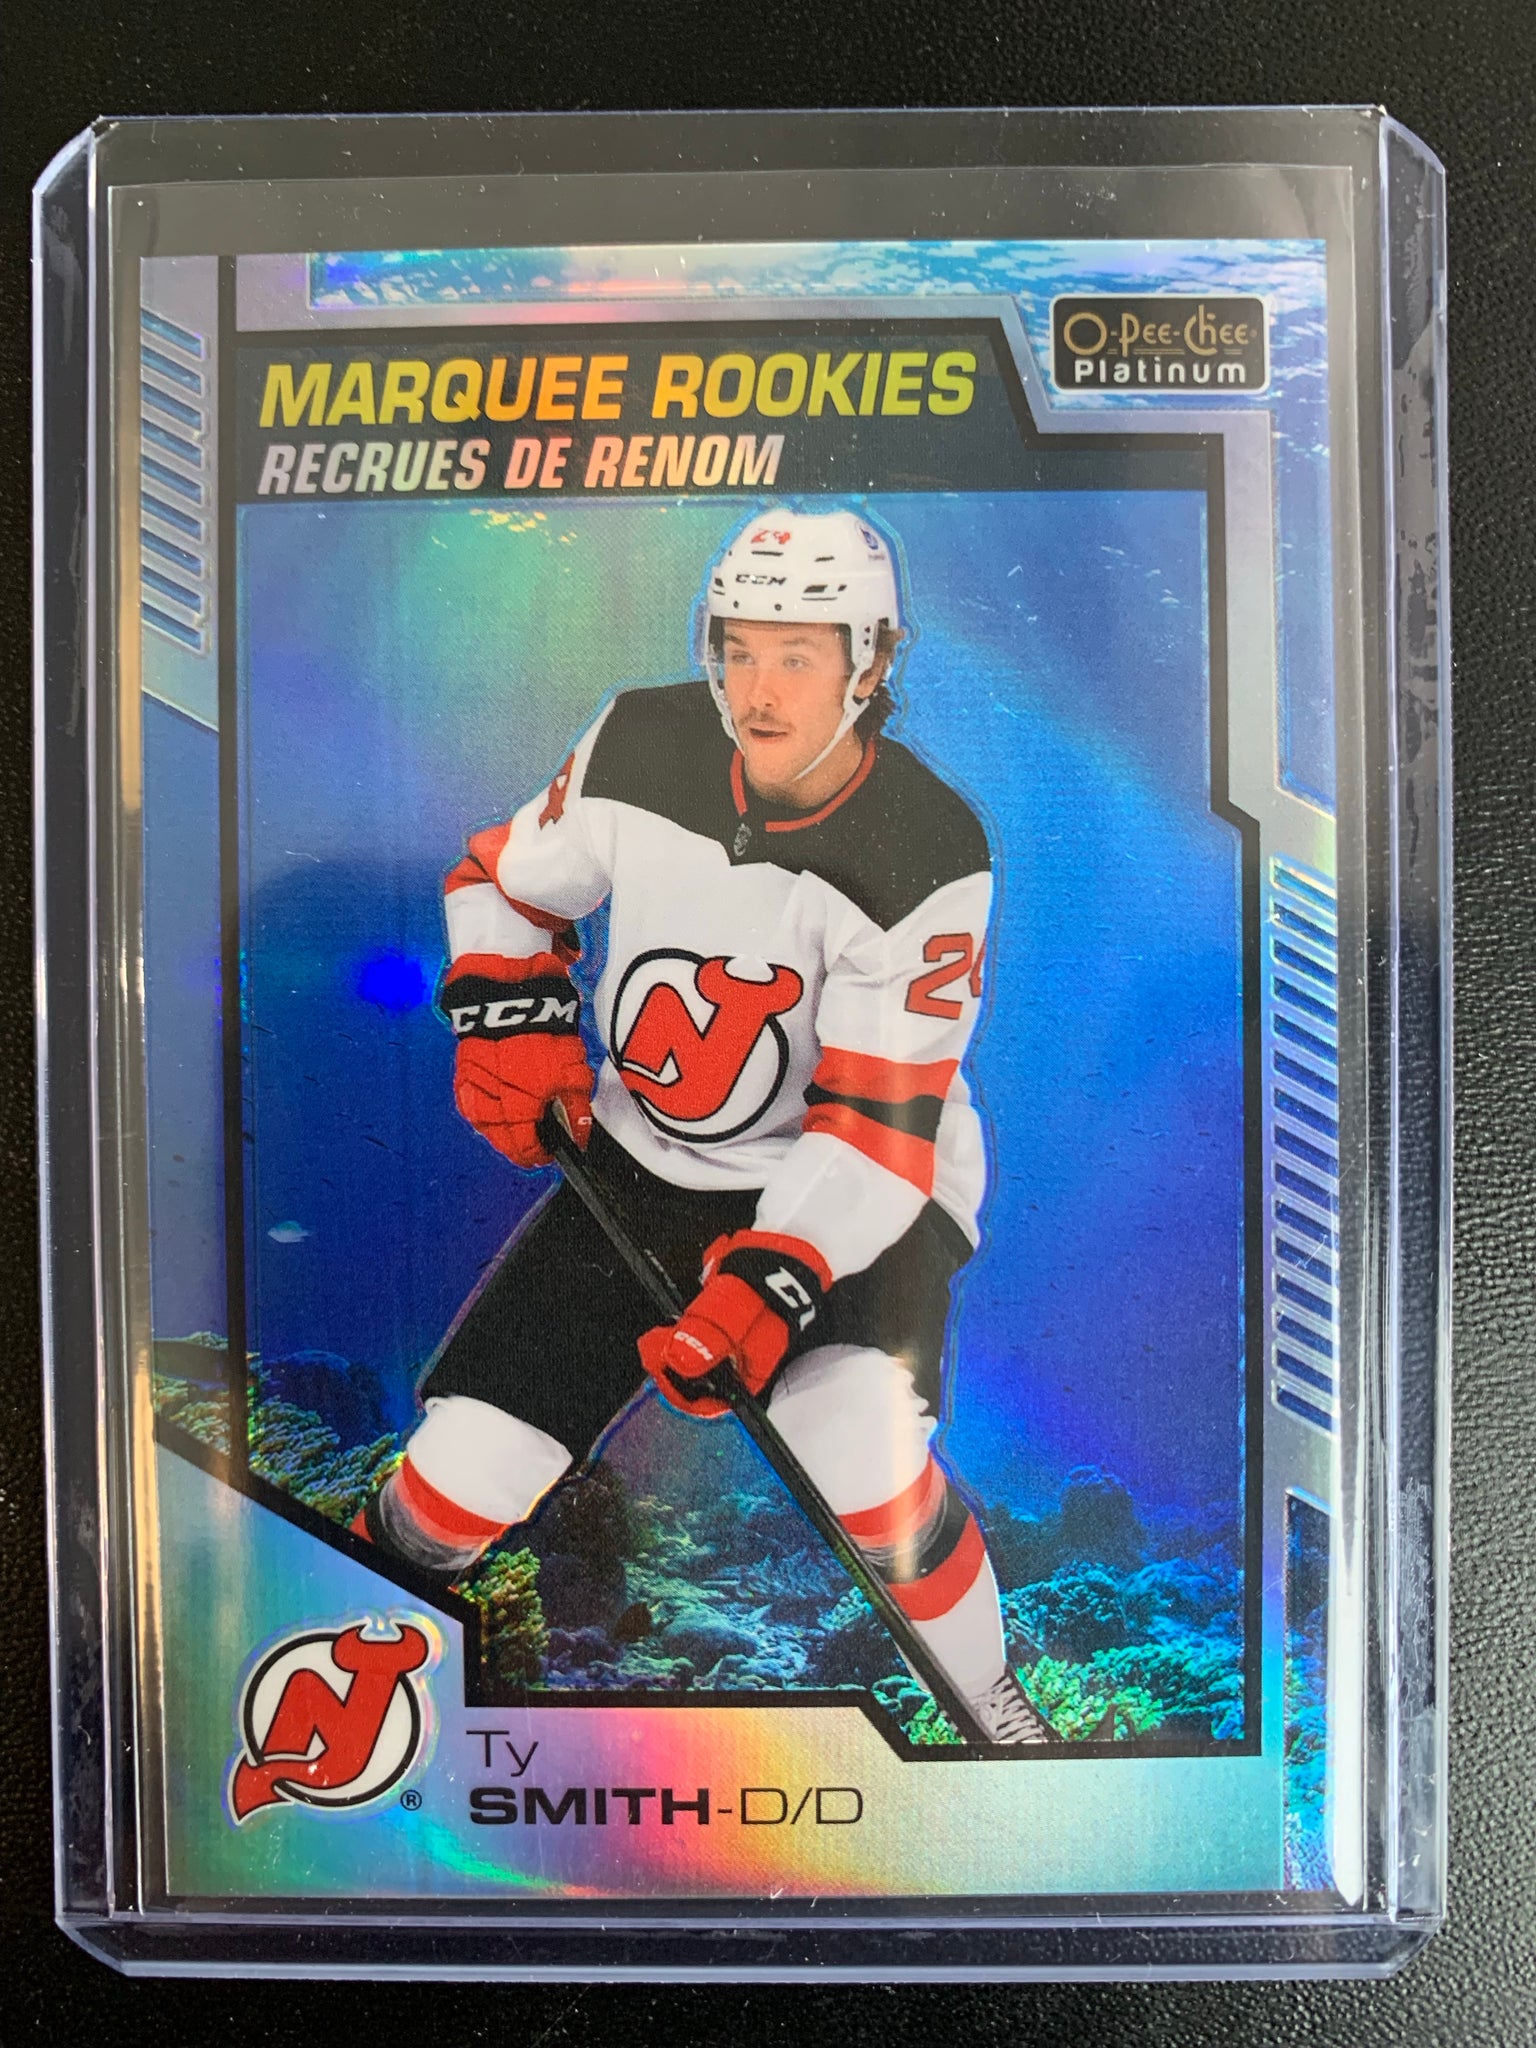 2020-21 UD O-PEE-CHEE PLATINUM HOCKEY #193 NEW JERSEY DEVILS - TY SMITH MARQUEE ROOKIES AQUAMARINE PARALLEL NUMBERED 060/499